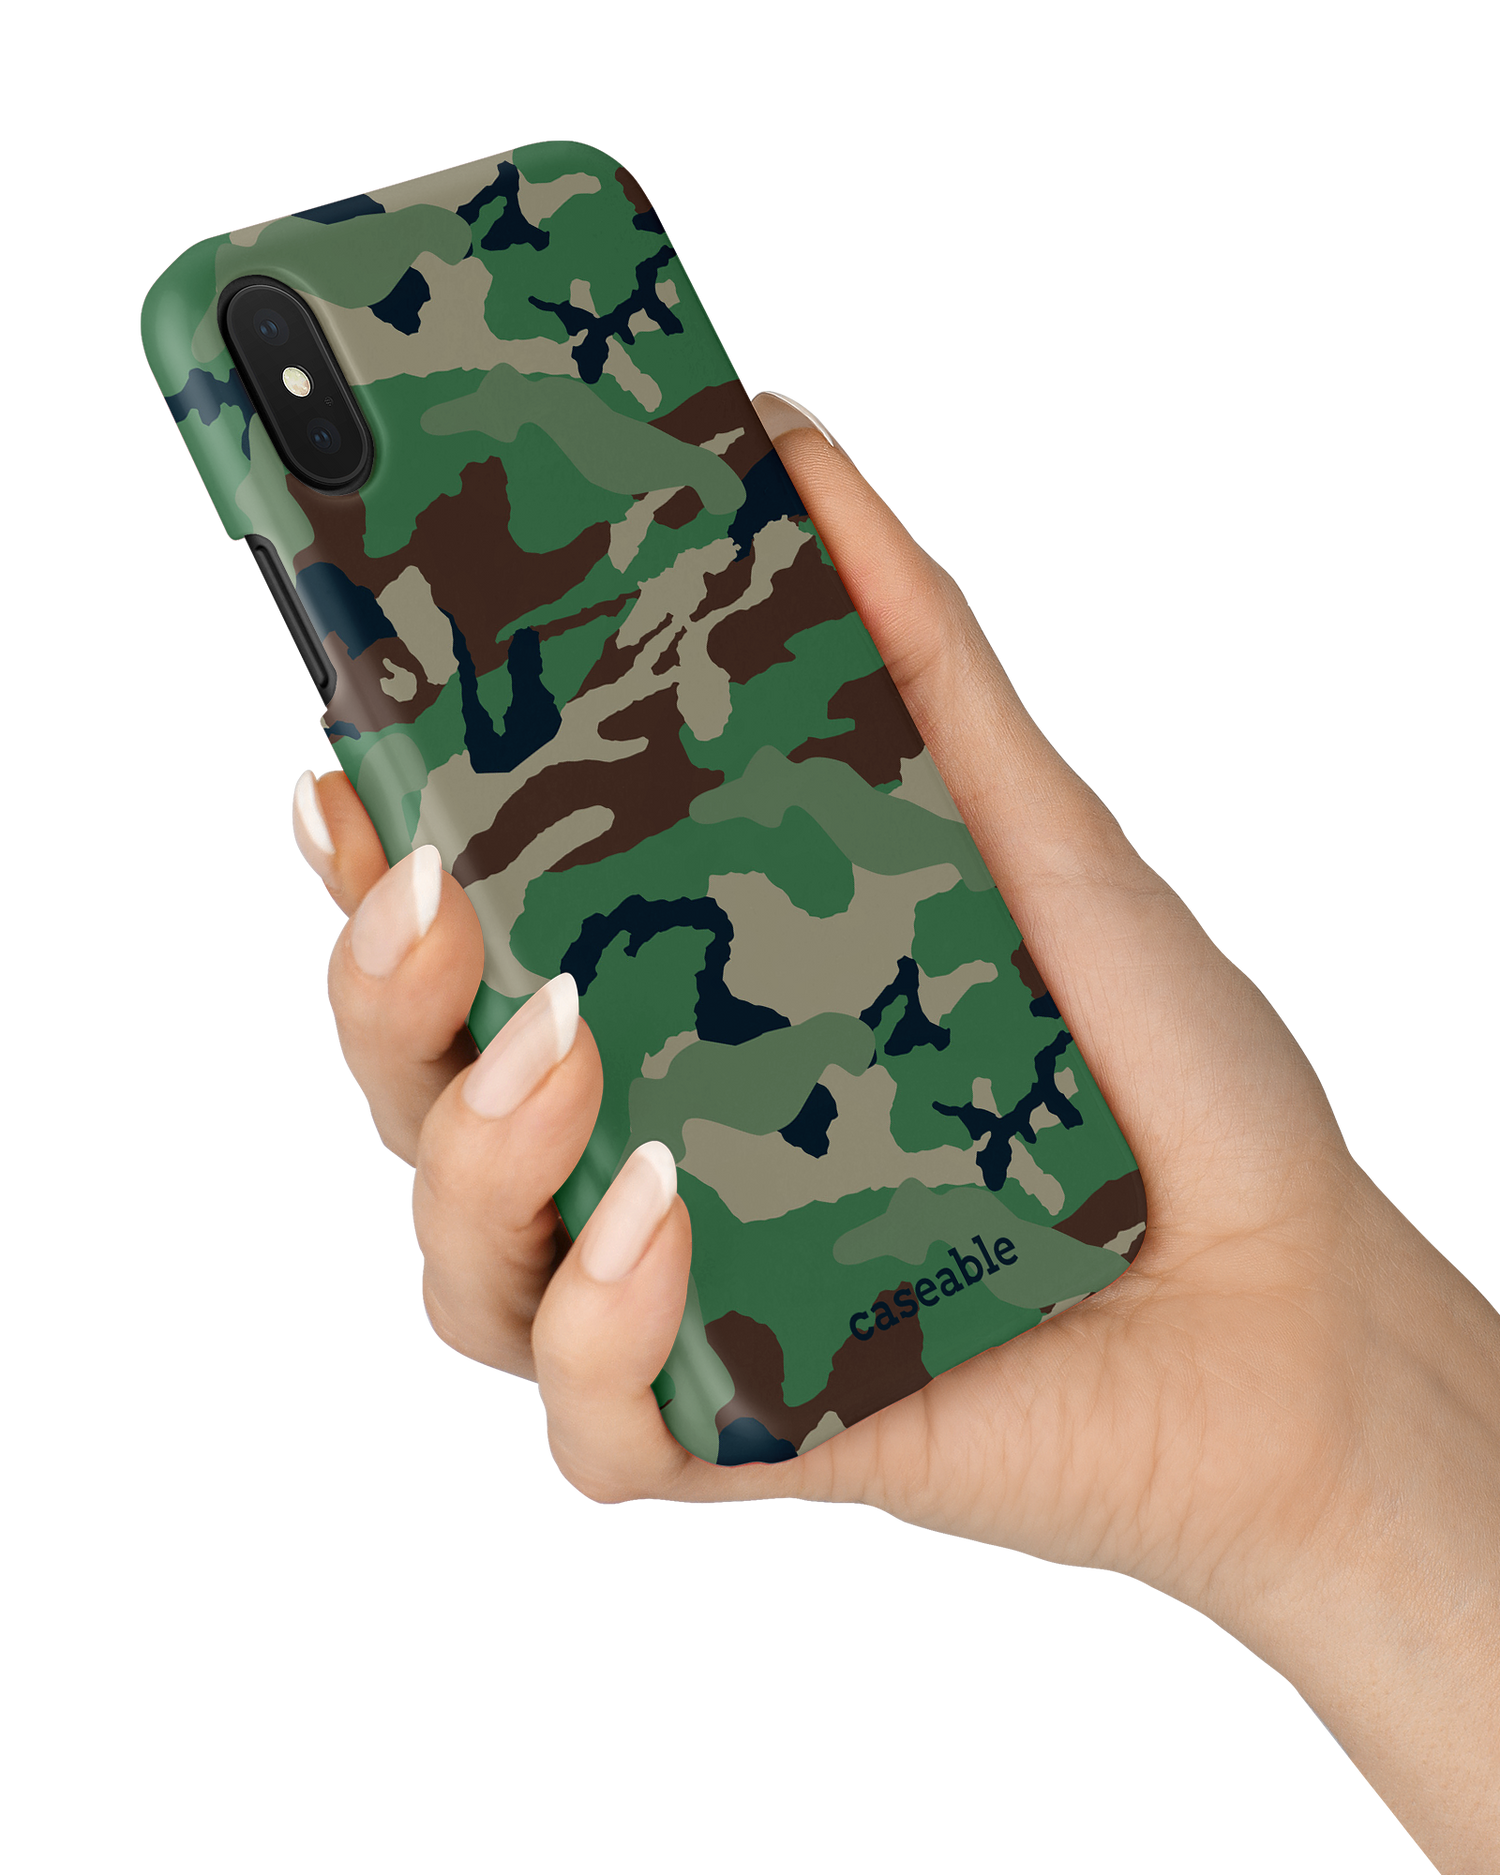 Green and Brown Camo Hard Shell Phone Case Apple iPhone X, Apple iPhone XS held in hand